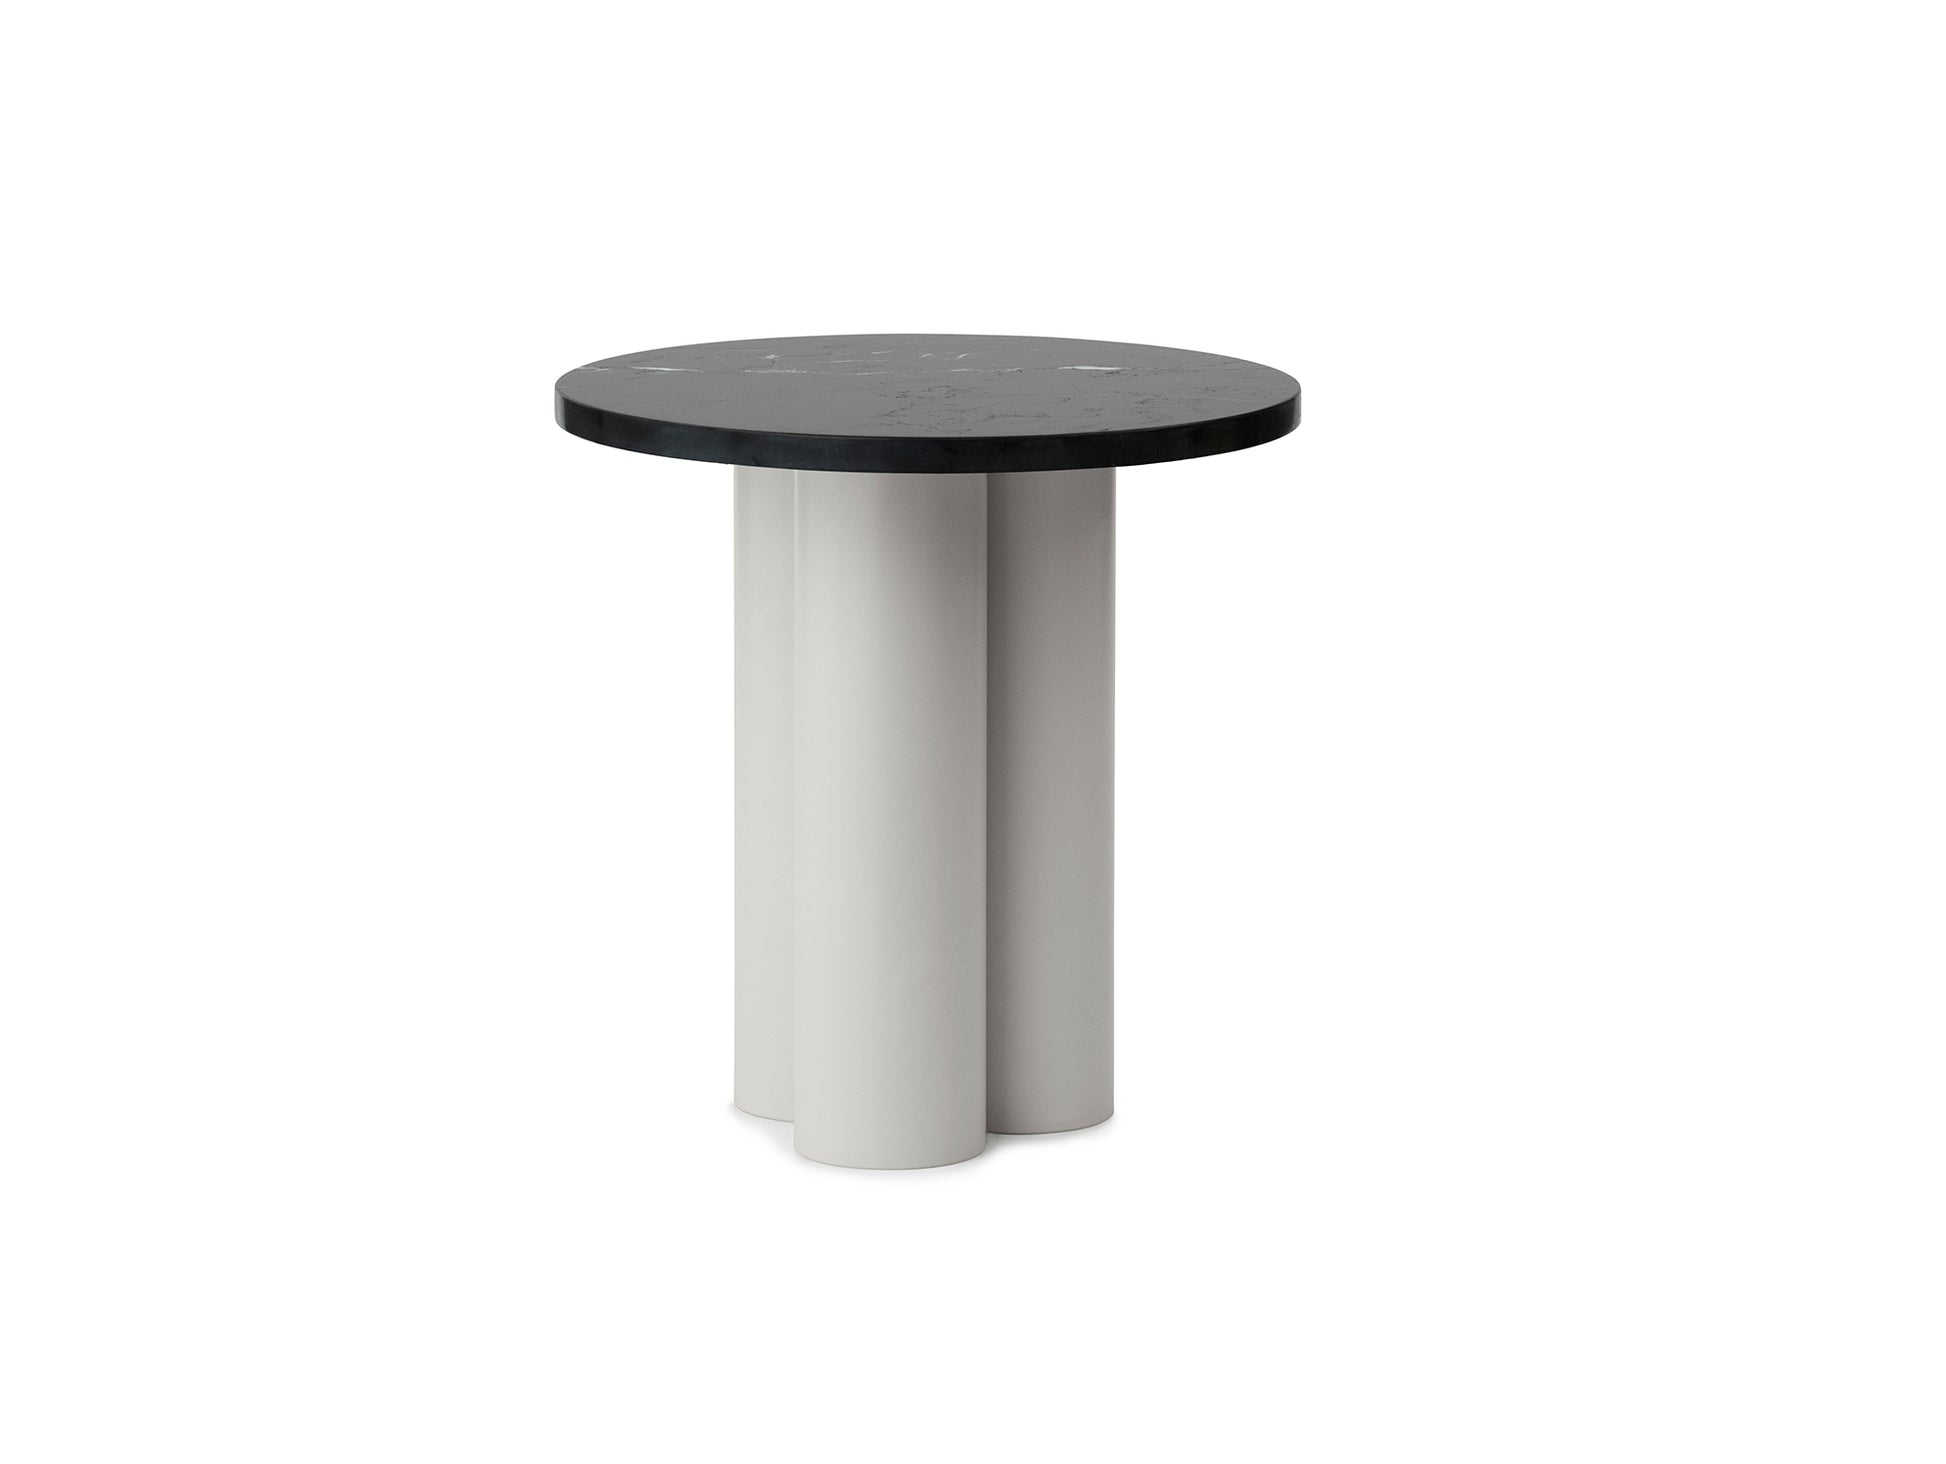 Dit Side Table by Normann Copenhagen - Sand Base / Nero Marquina